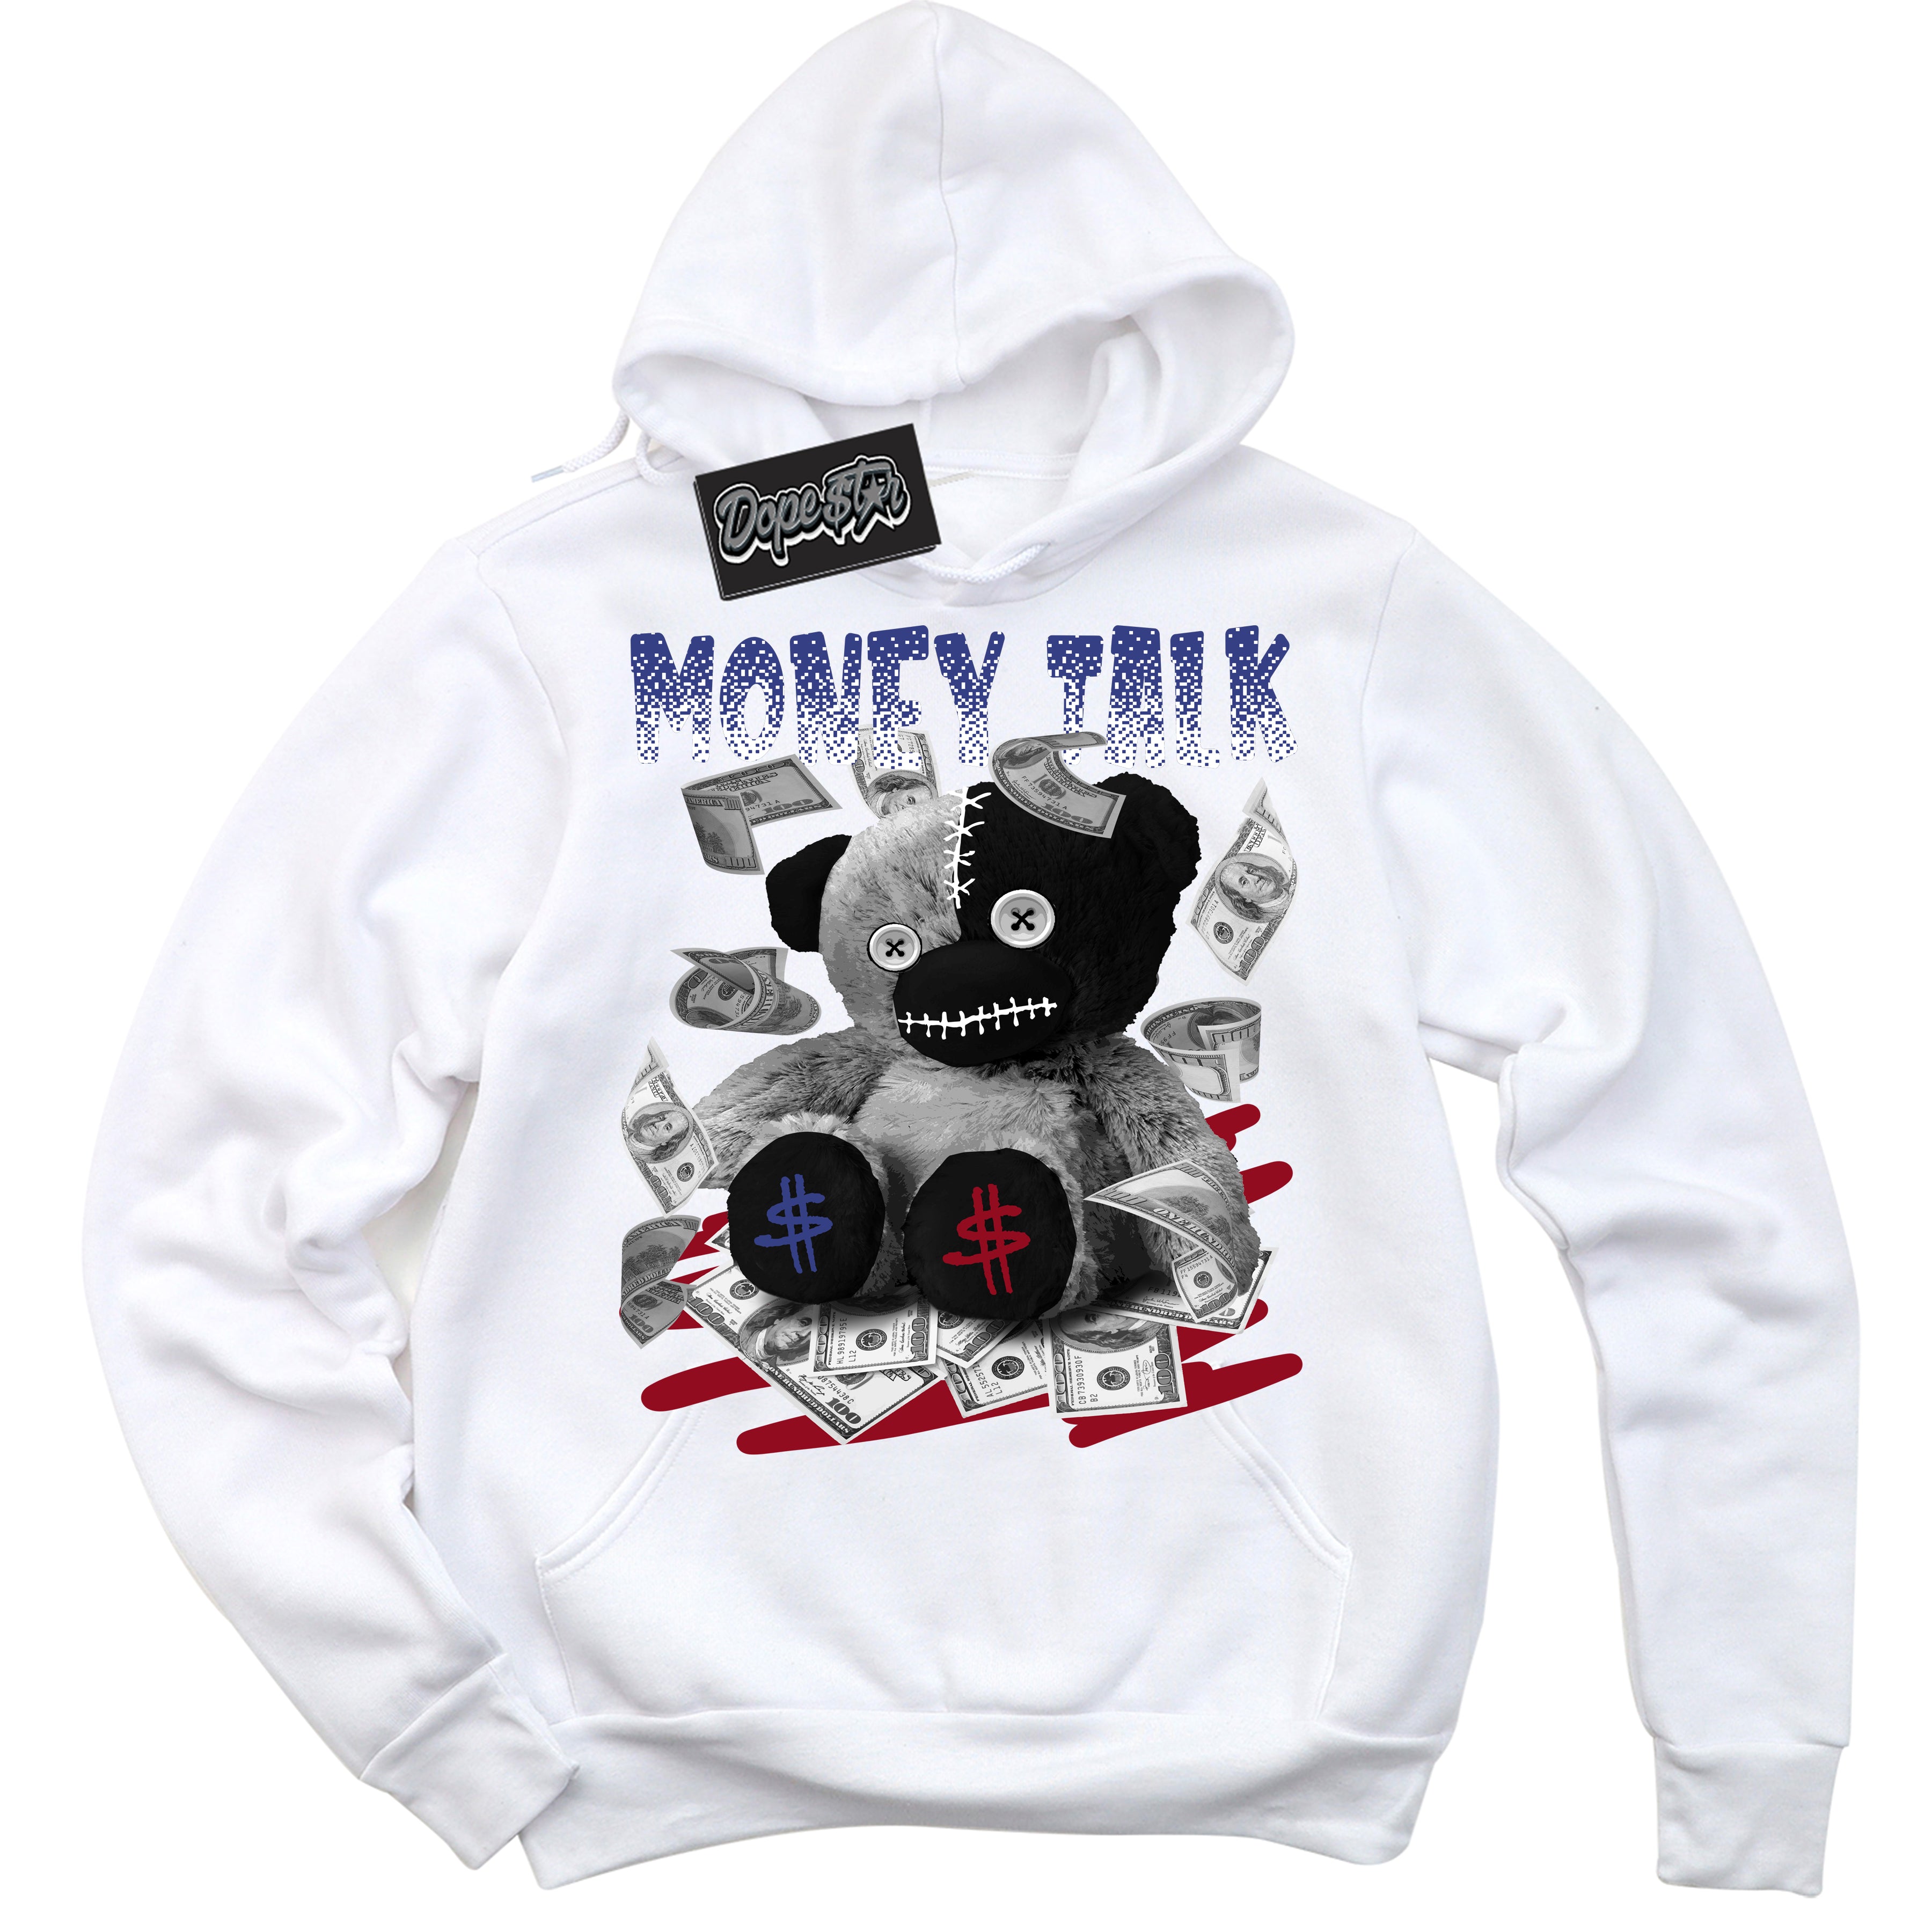 Cool White Hoodie with “ Money Talk Bear ”  design that Perfectly Matches Playoffs 8s Sneakers.